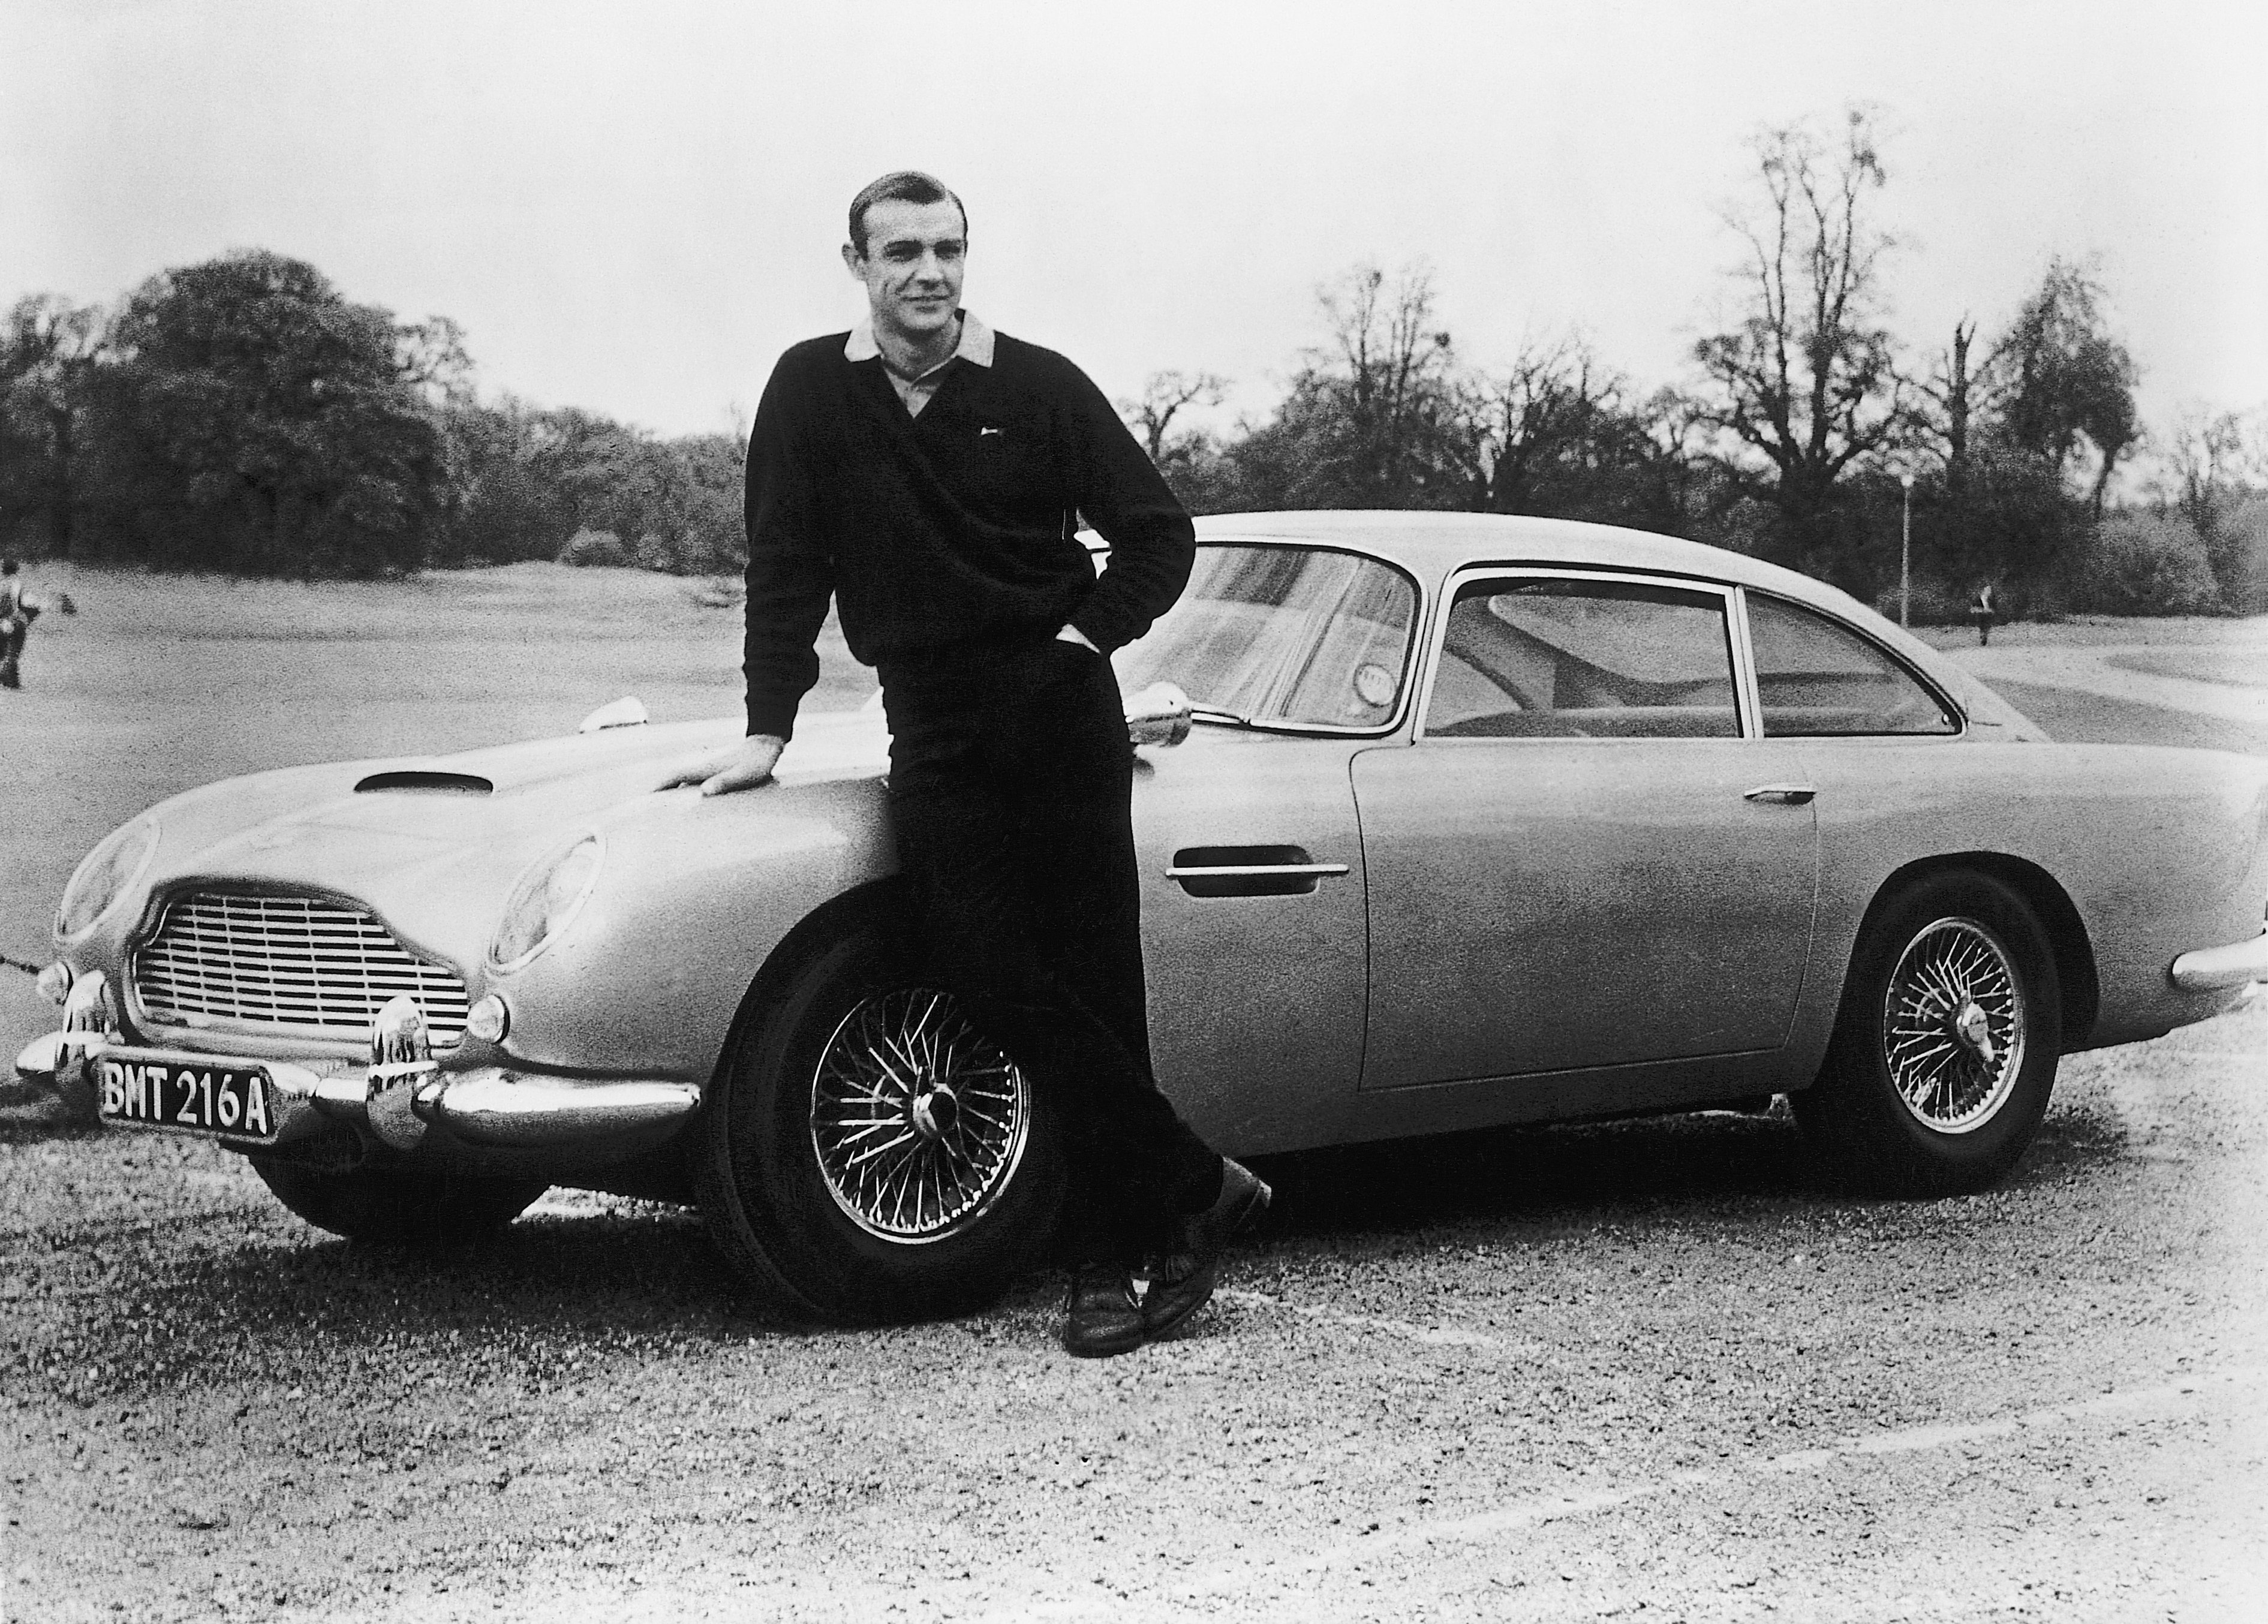 Sean Connery pictured on the set of "Goldfinger" with one of the fictional spy's cars, a 1964 Aston Martin DB5. / Source: Getty Images